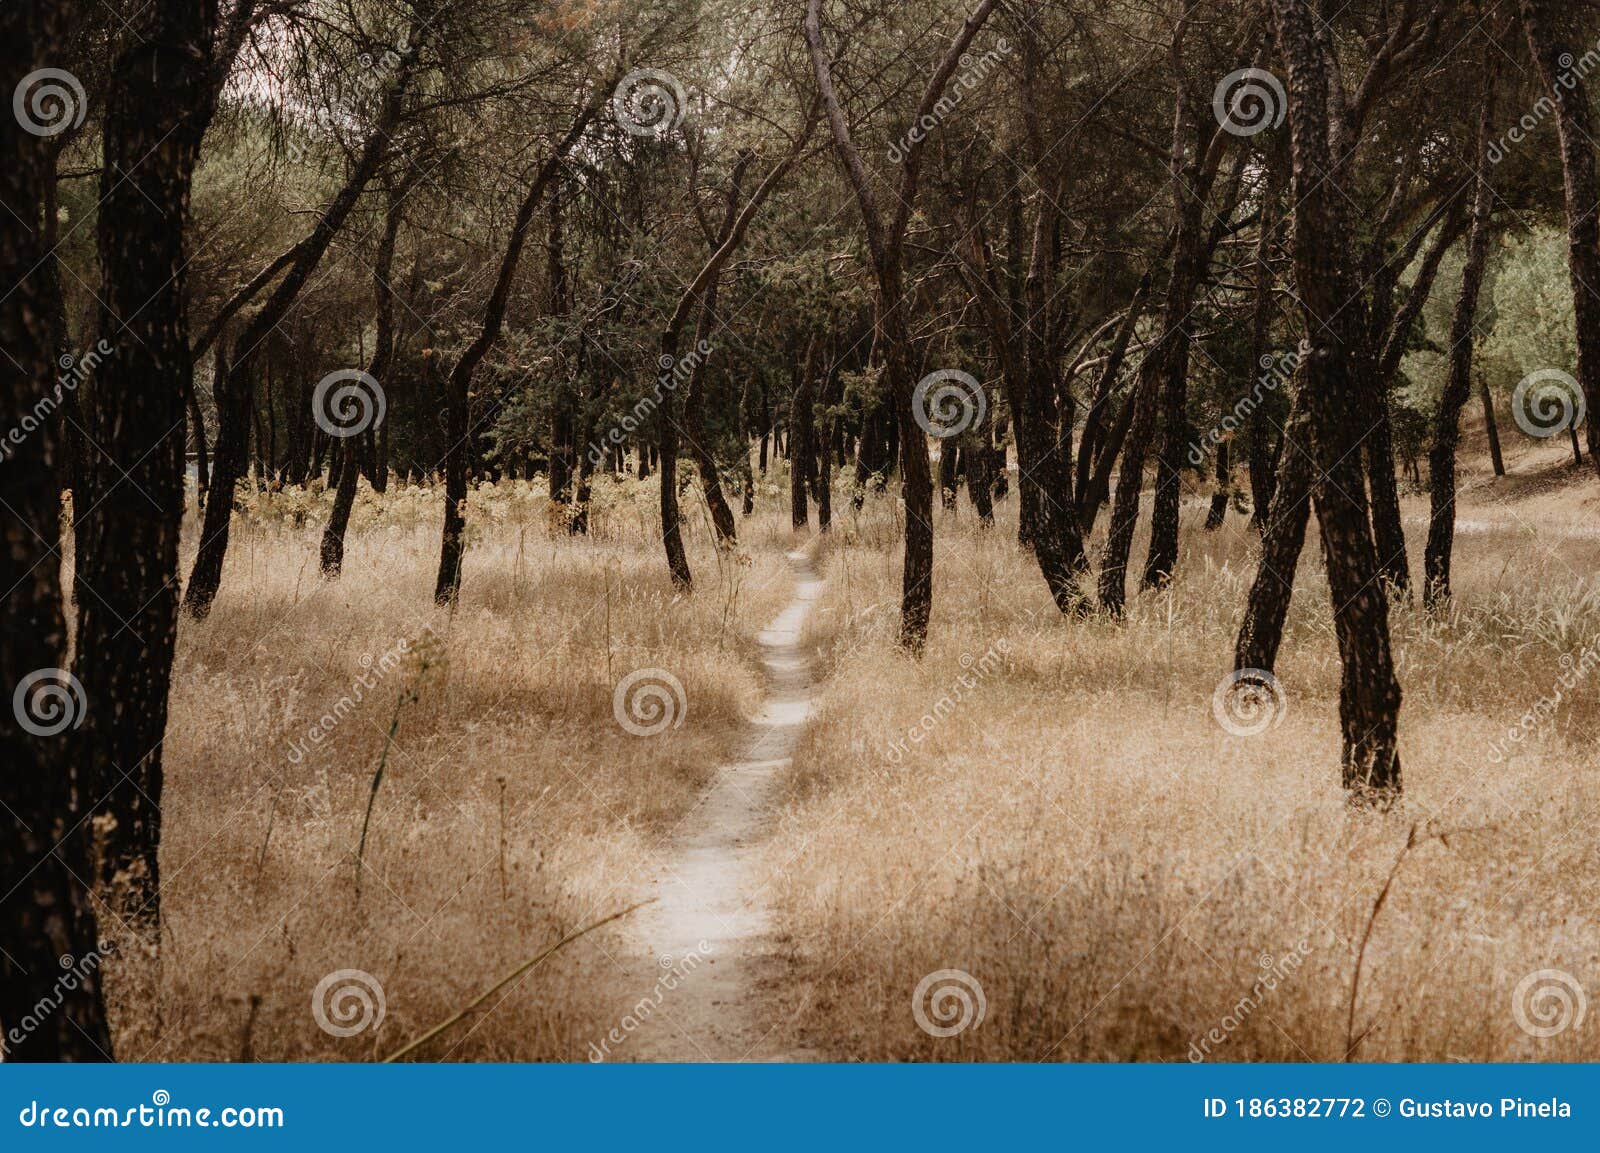 meadow with dry grass, pines, holm oaks, with path